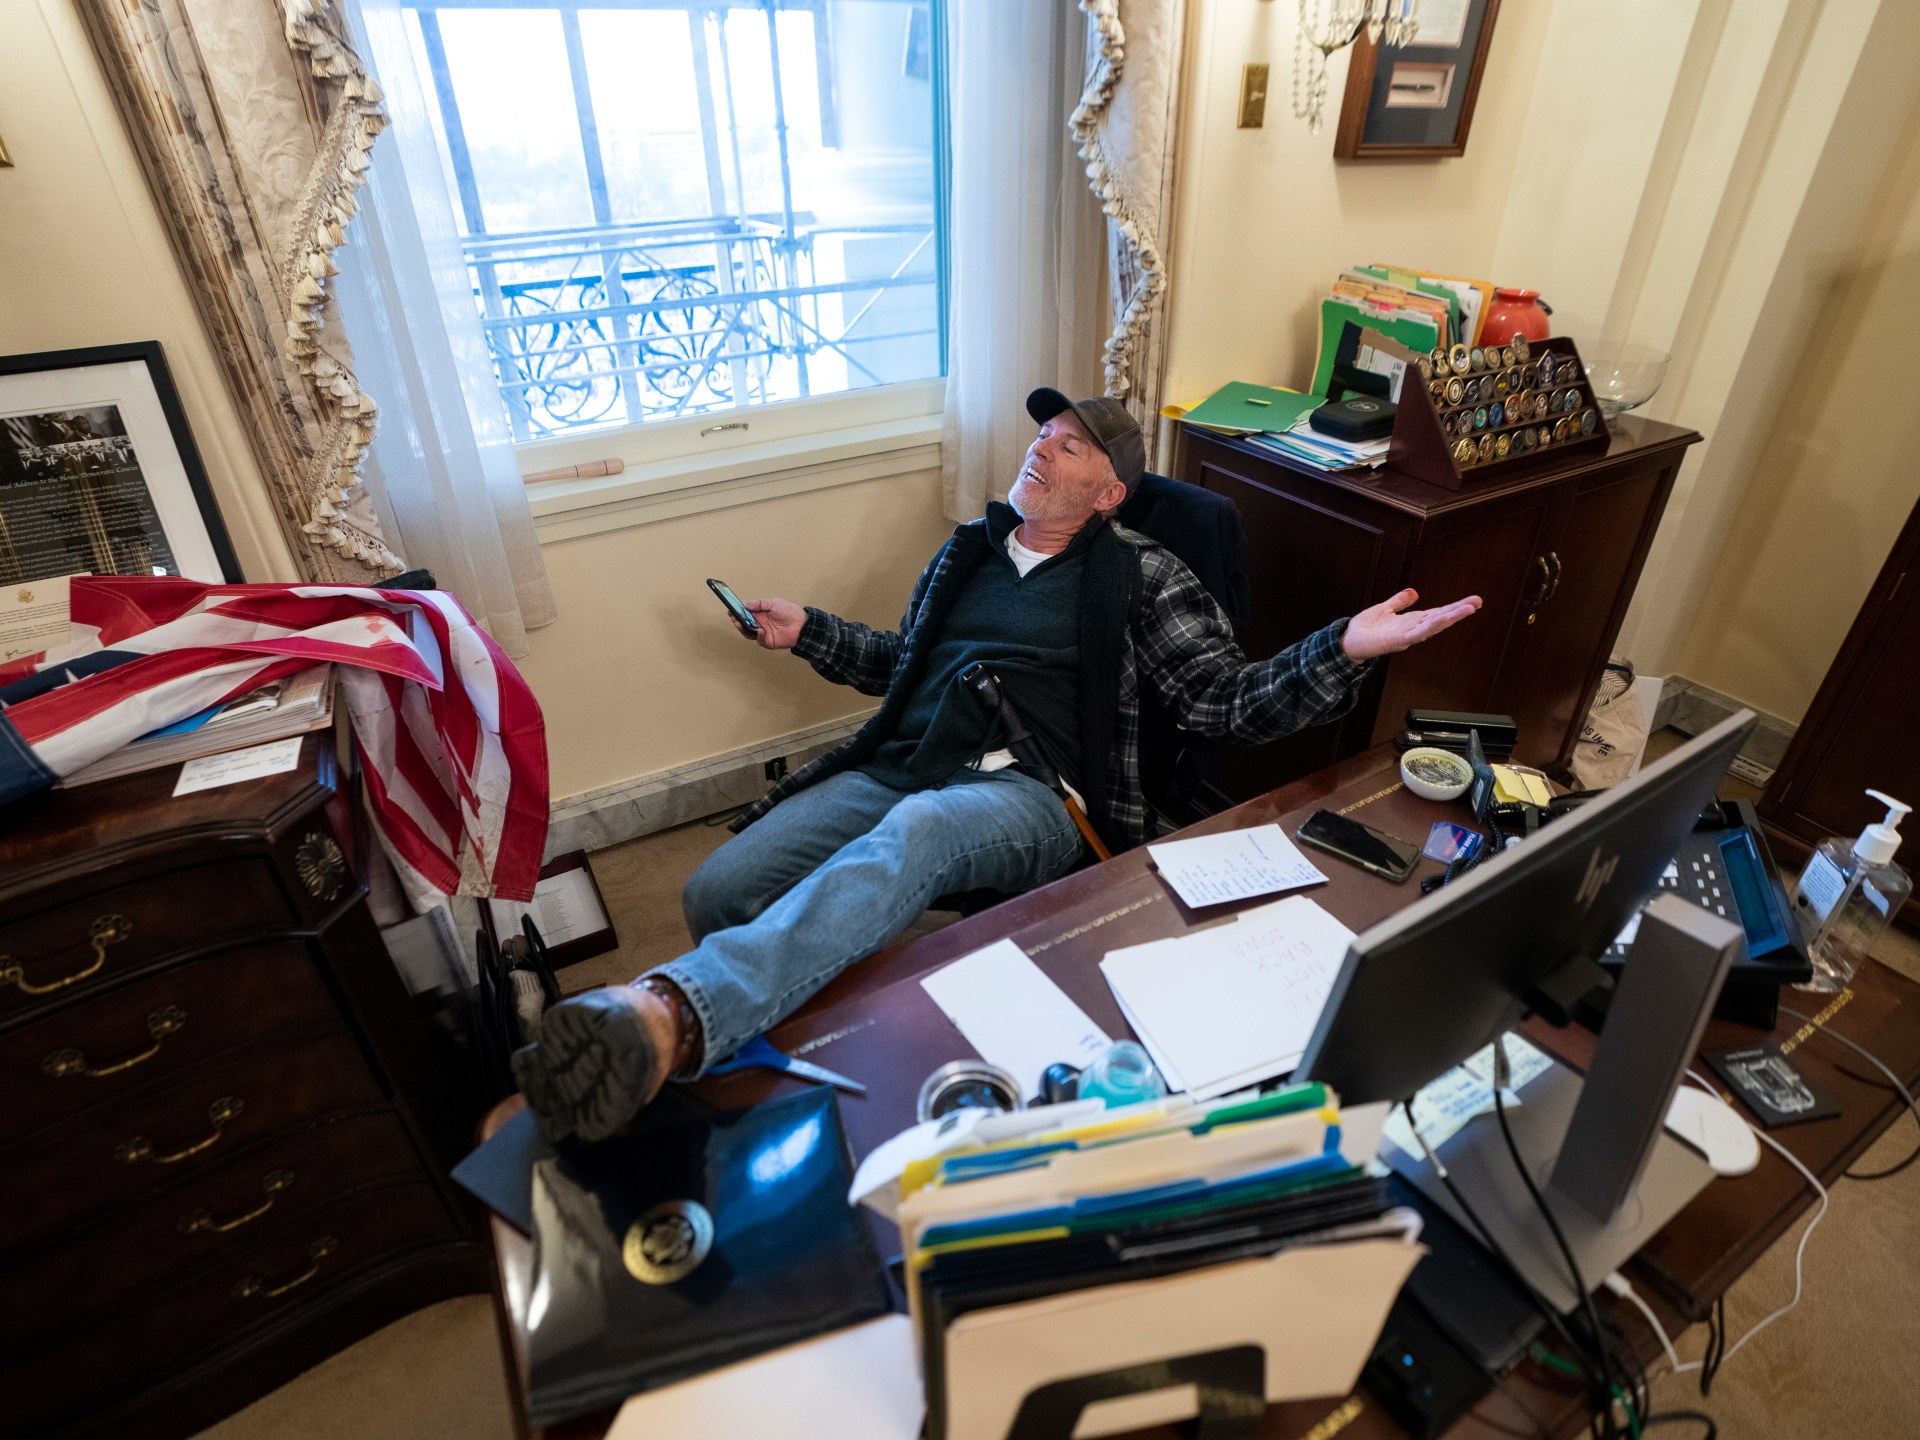 Man photographed with foot on Pelosi’s desk on Jan 6 found guilty